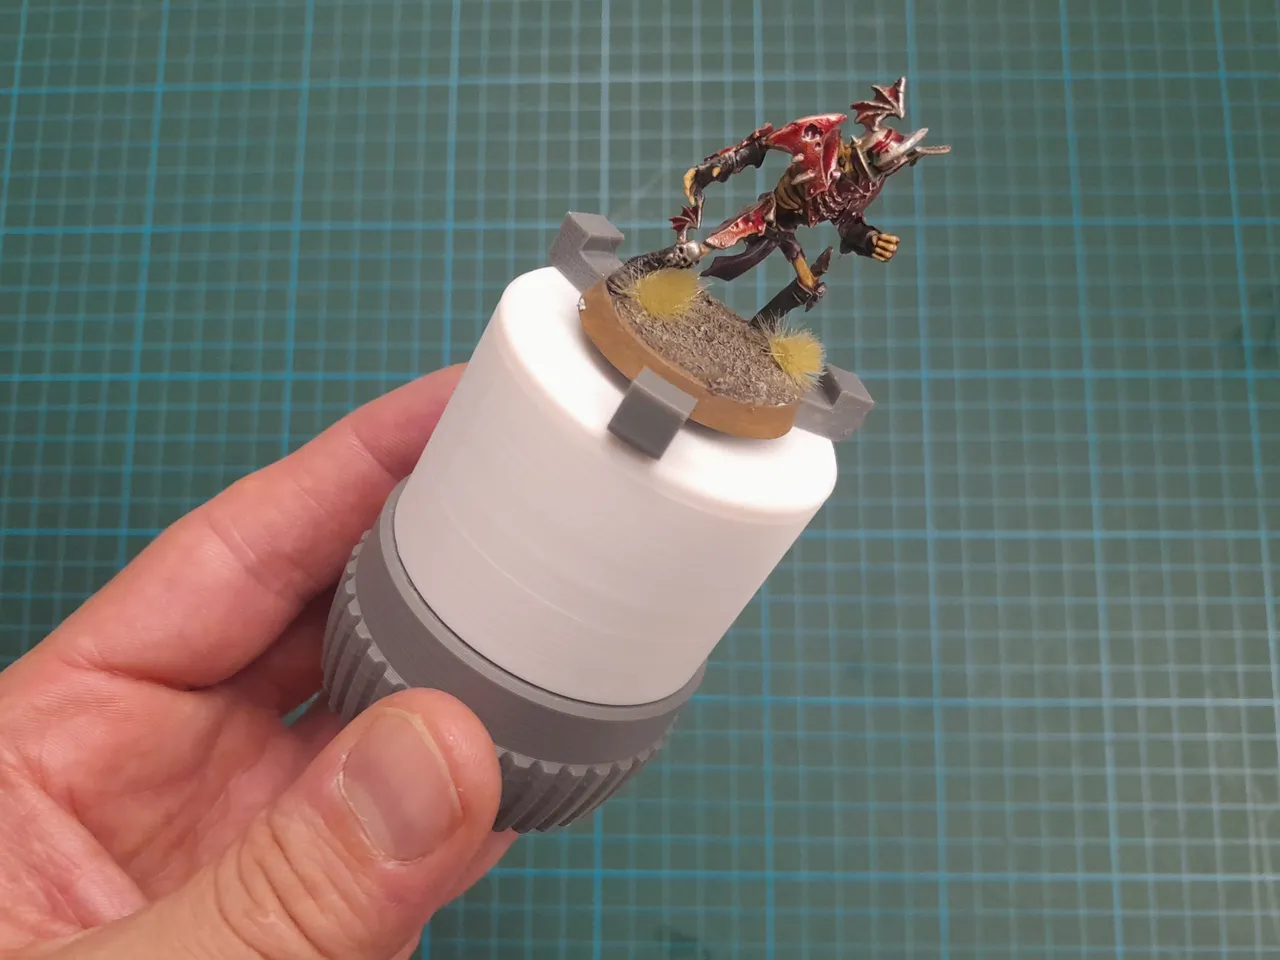 Vise Miniature Holder For Painting by 3D Printing Dude